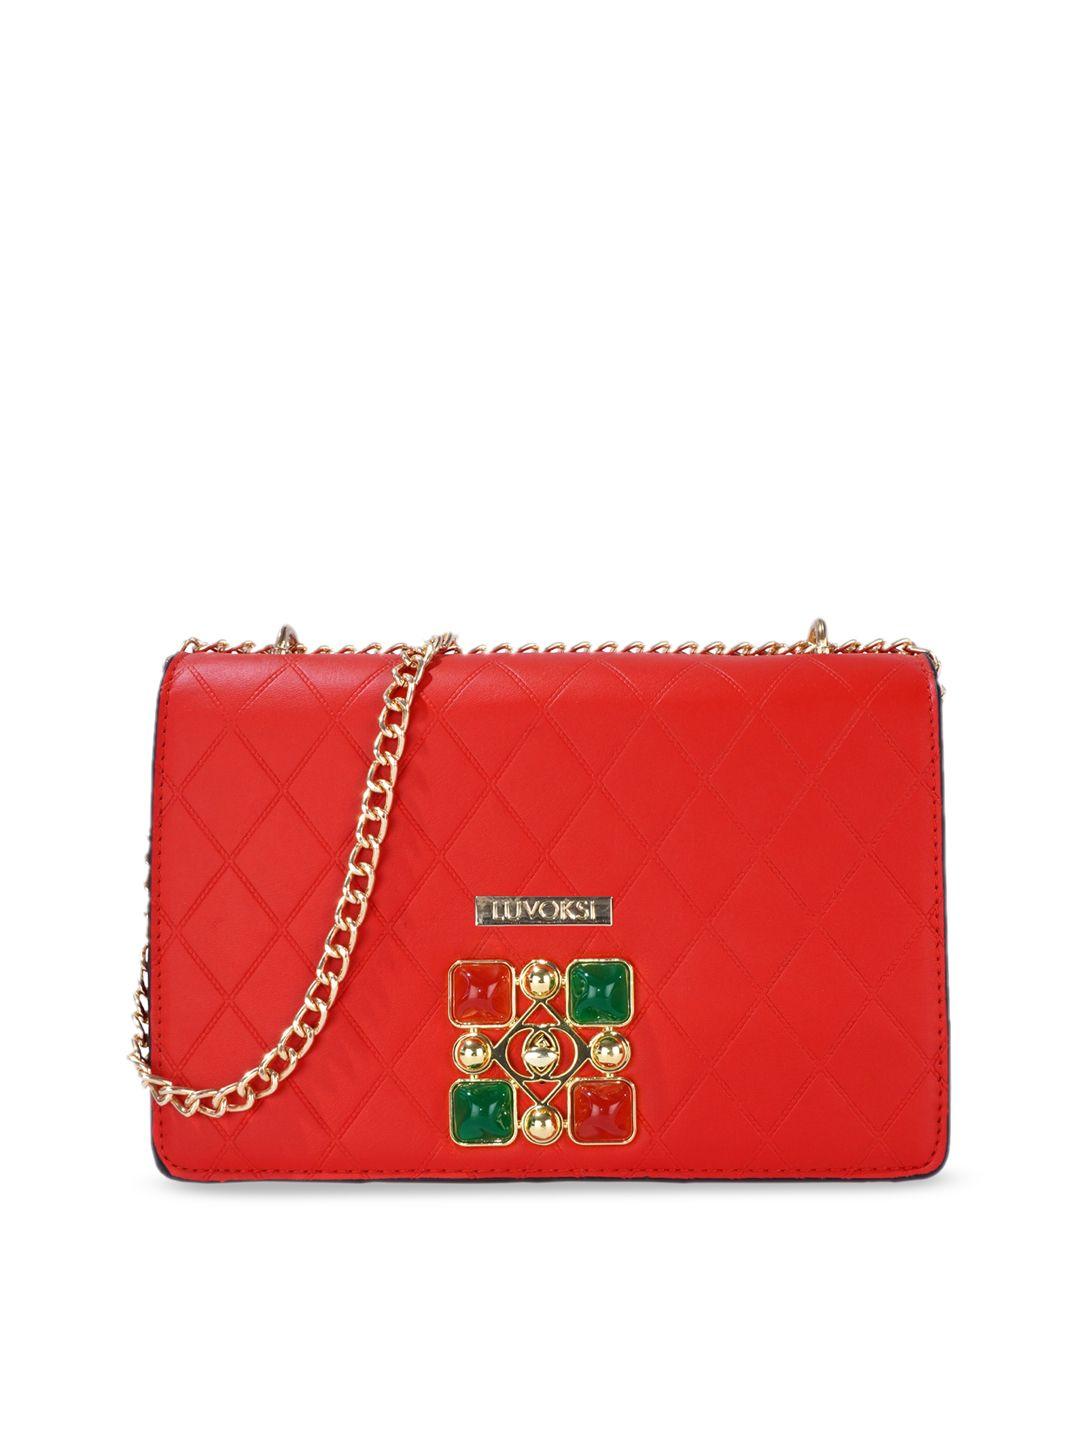 luvoksi red quilted structured sling bag